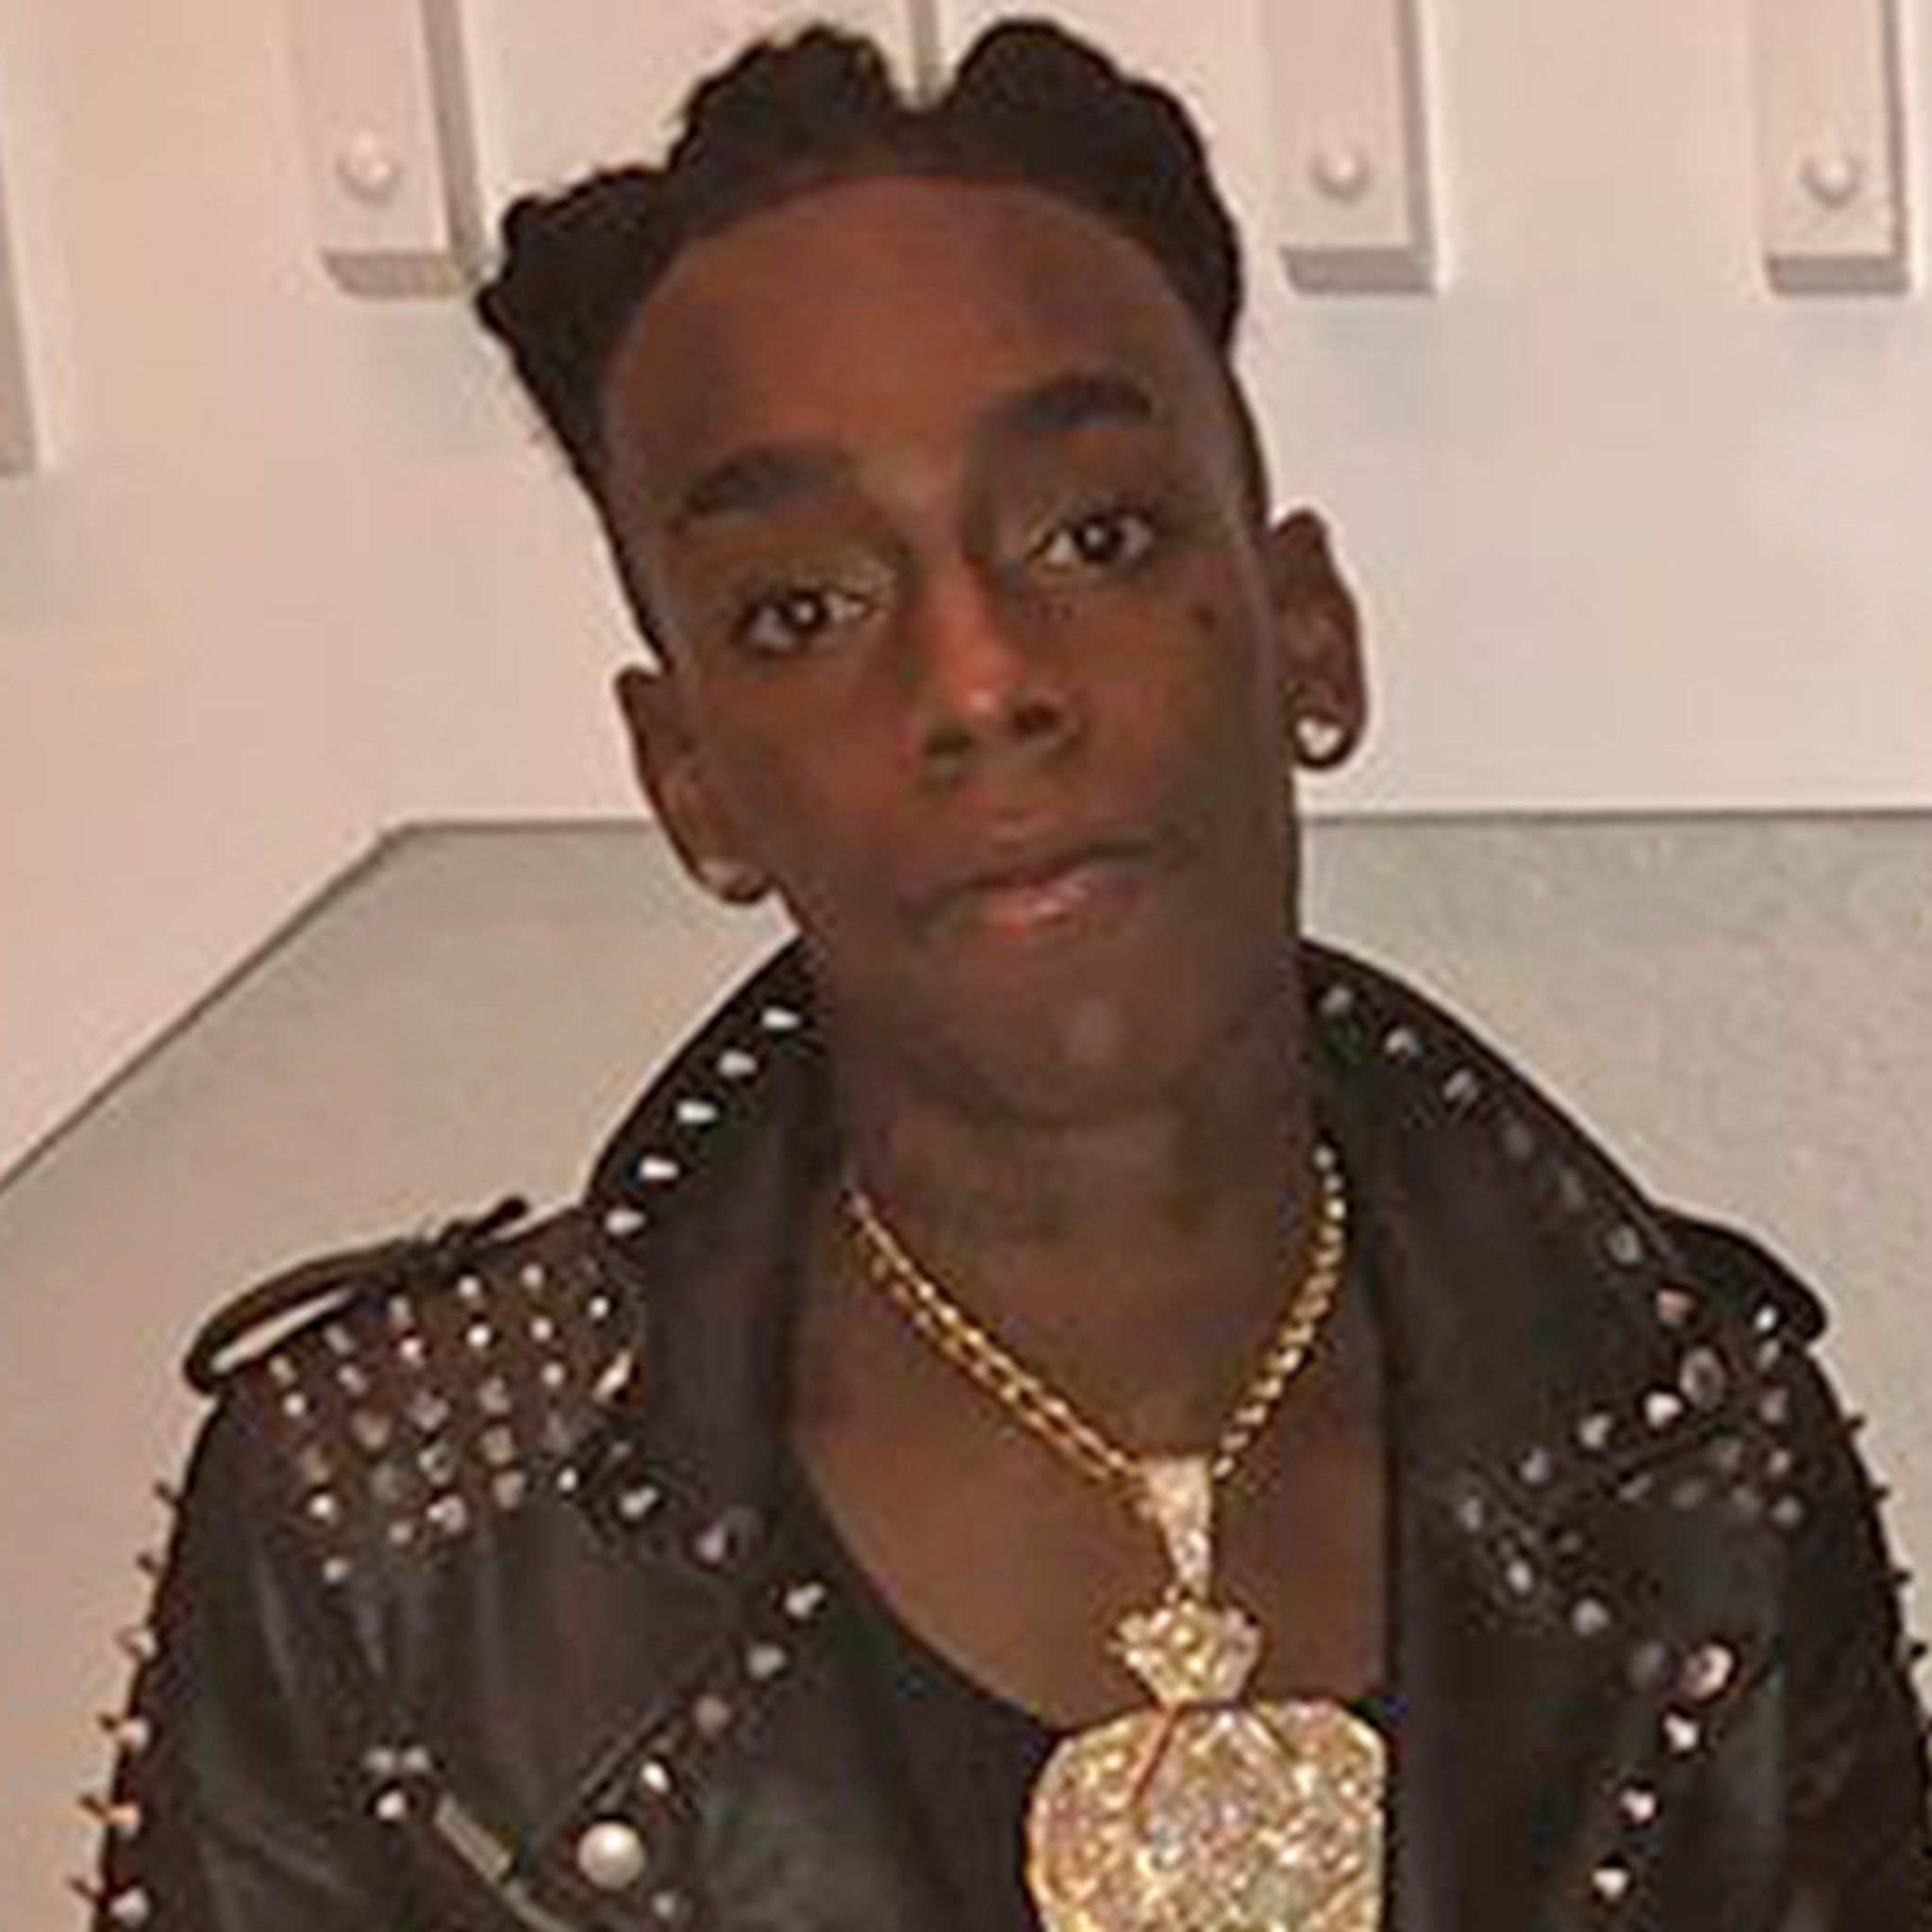 Ynw Melly So Close To Murder Victim S Family He Has Mom S Name Tattoo